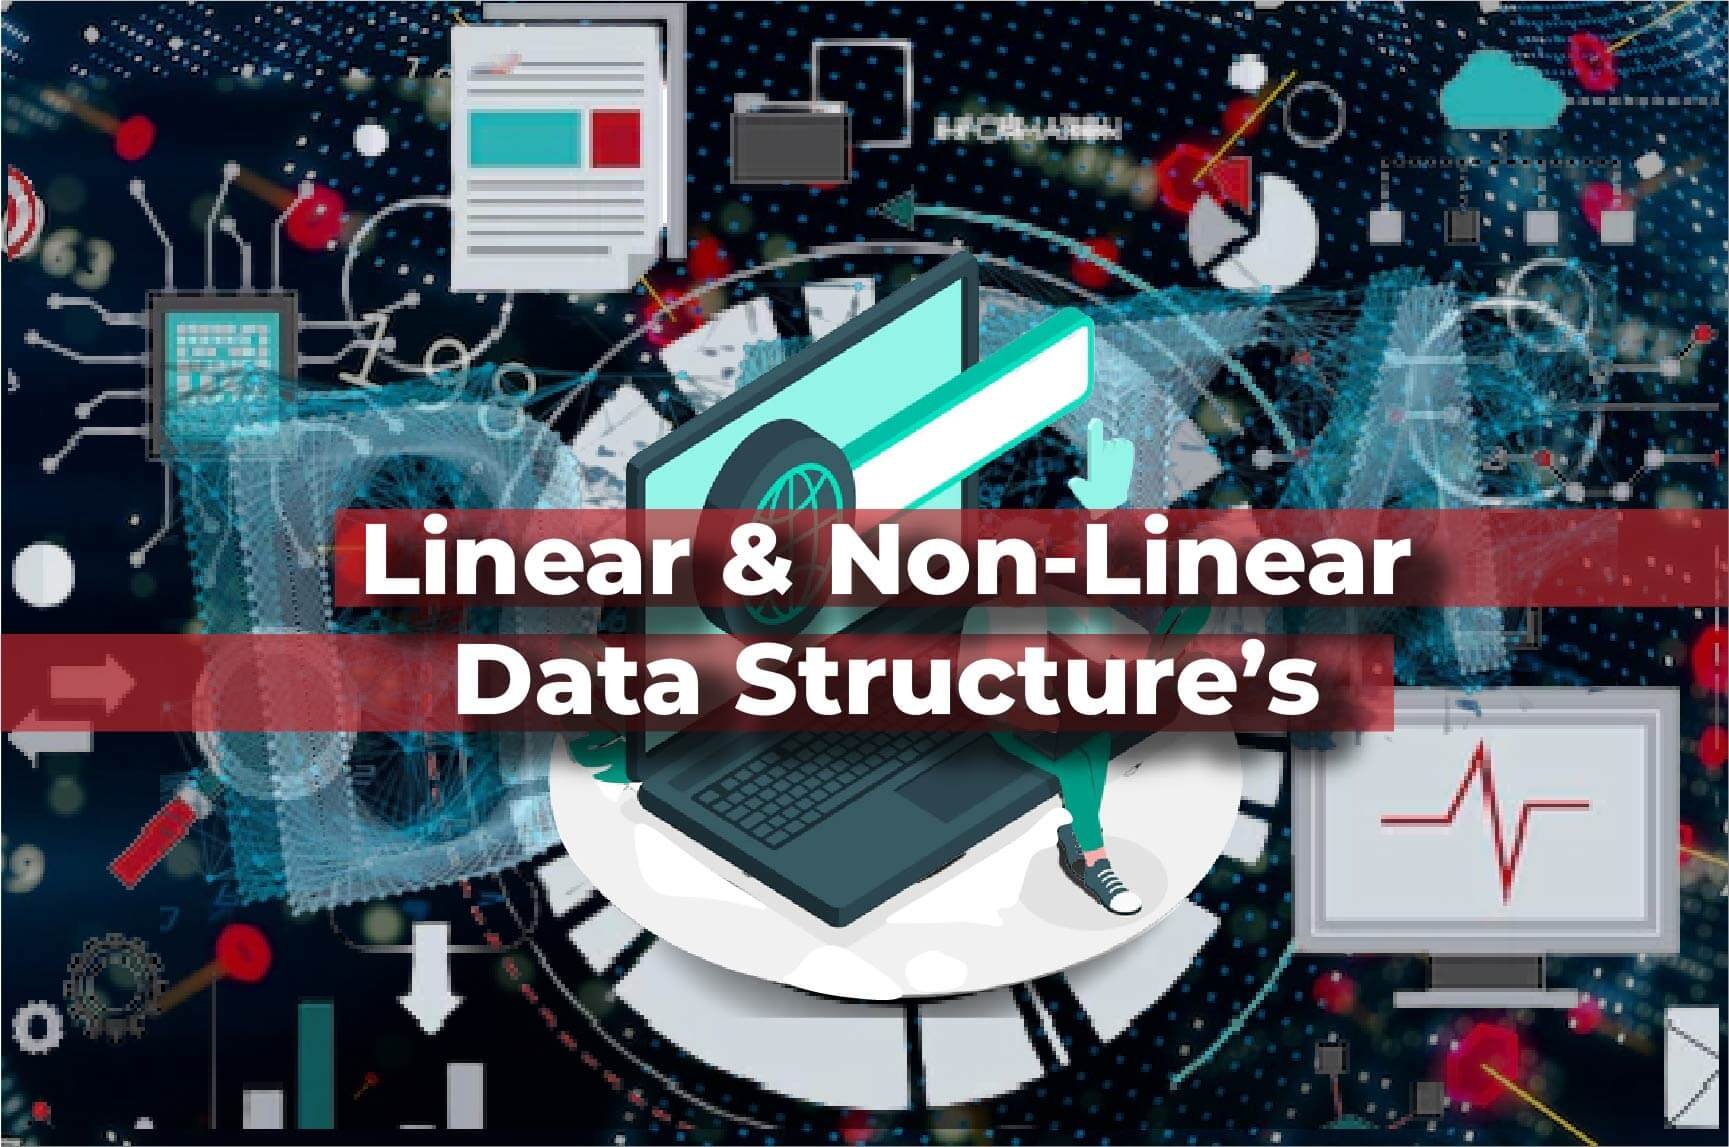 Linear and Non Linear Data Structure | Analytics Jobs